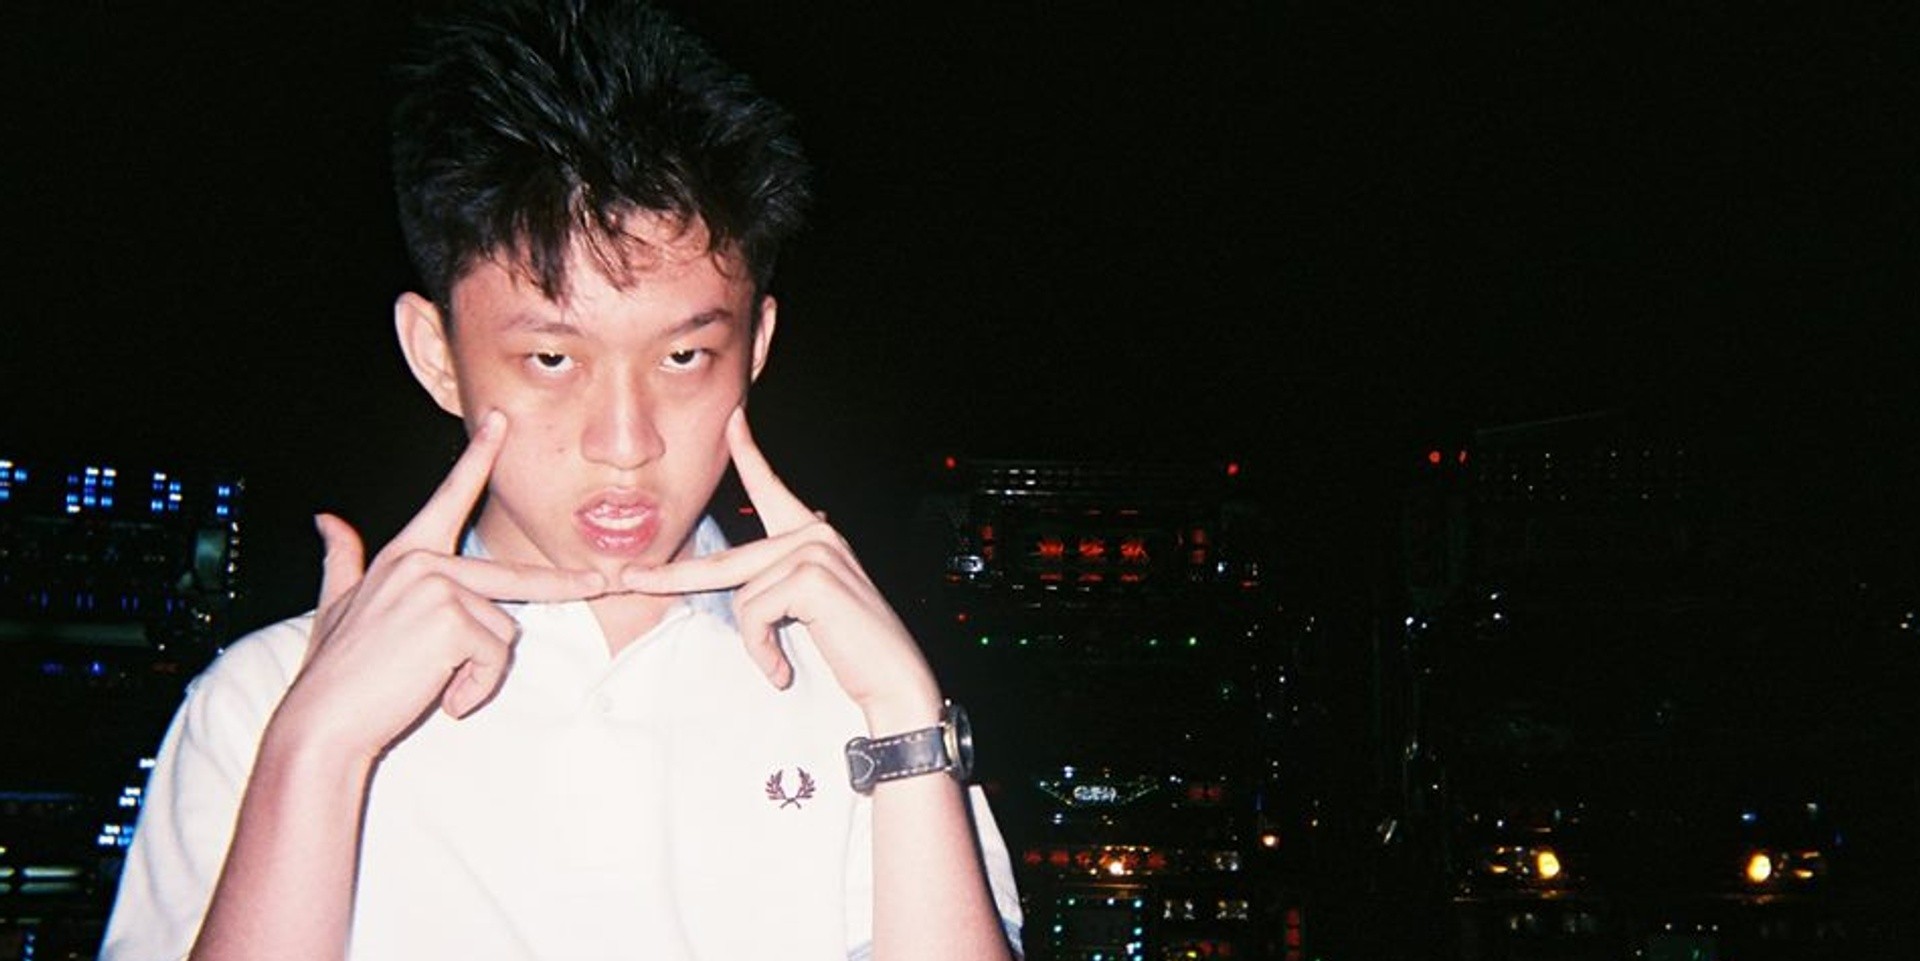 Rich Chigga releases new song 'Gospel', featuring Keith Ape and XXXTentacion — listen